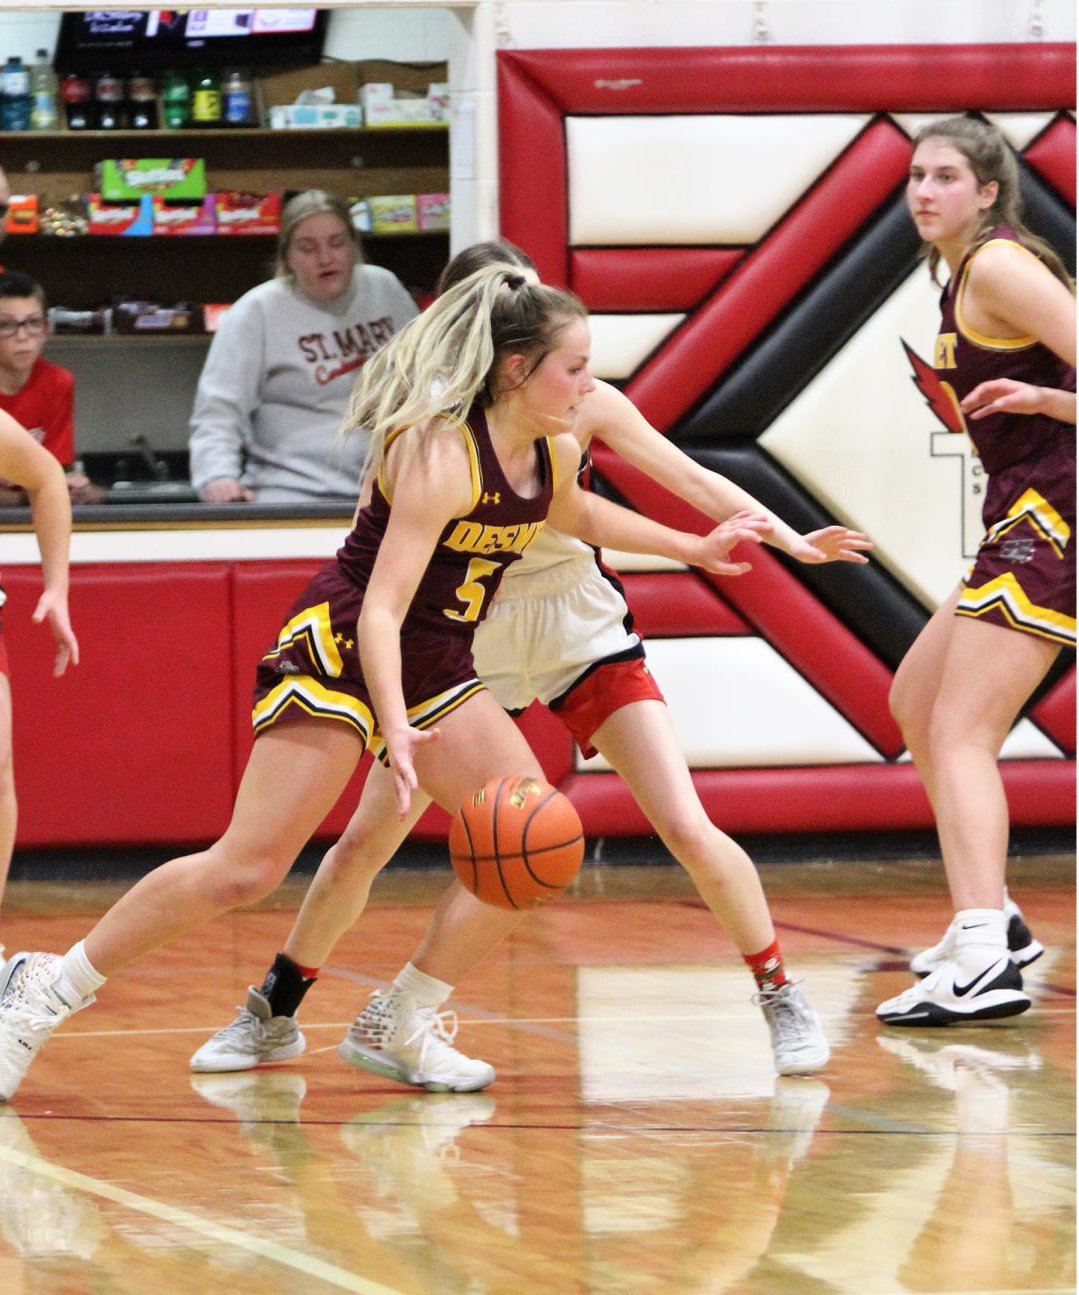 Emma Albrecht (5) handles the ball while Kennadi Buchholz posts up inside Mon., Dec. 20 against Dell Rapids St. Mary. The Bulldogs defeated the Cardinals 54-43 to extend their record to 5-0.